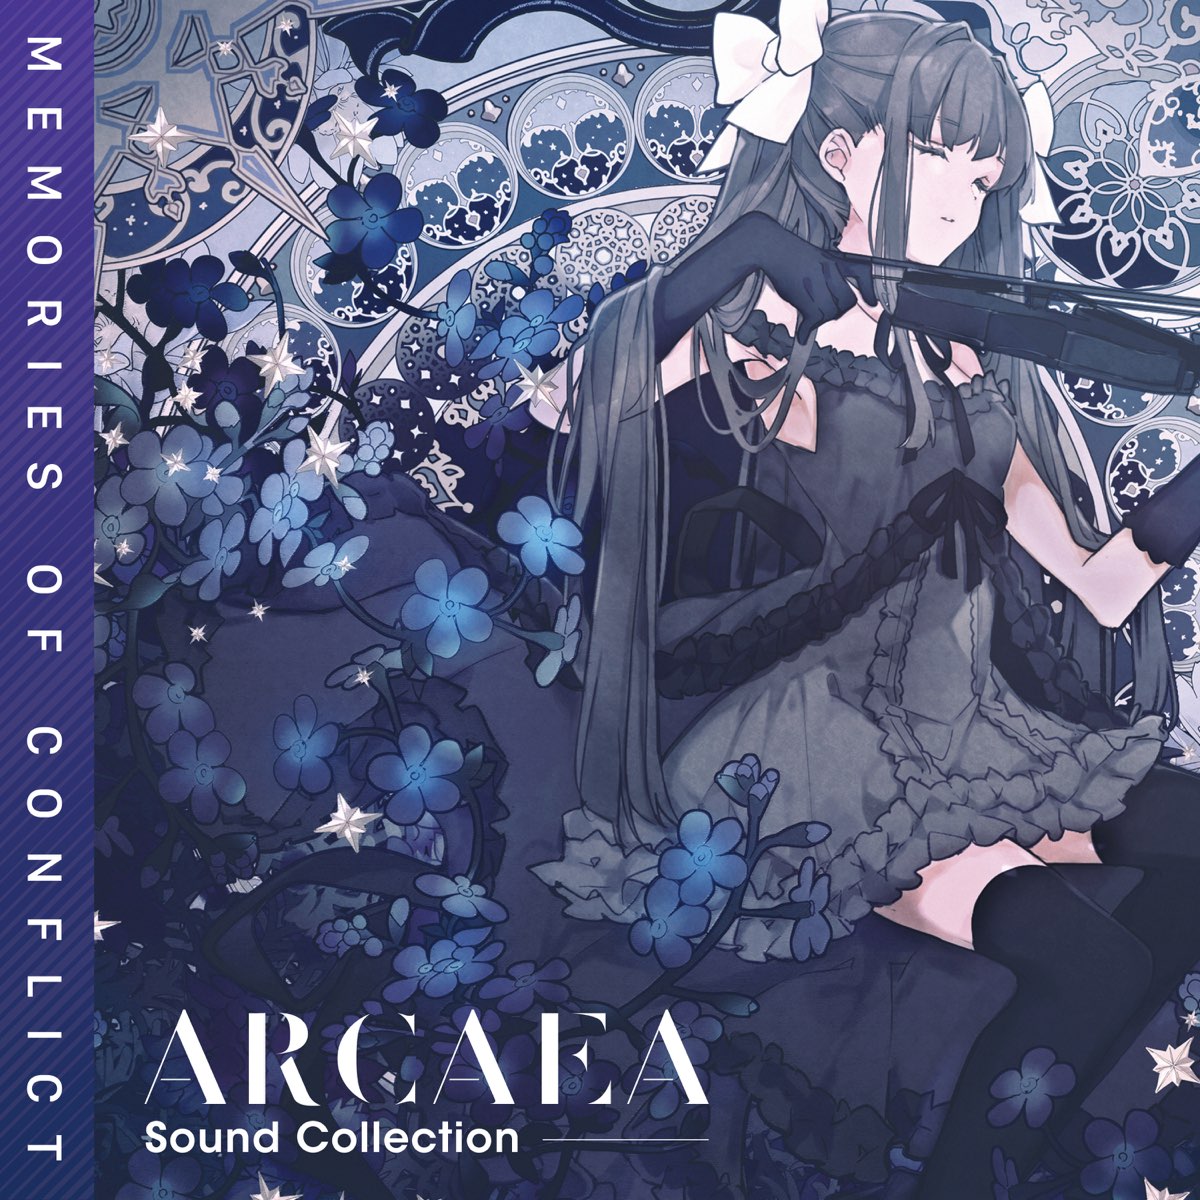 Various Artistsの「Arcaea Sound Collection: Memories of Conflict 